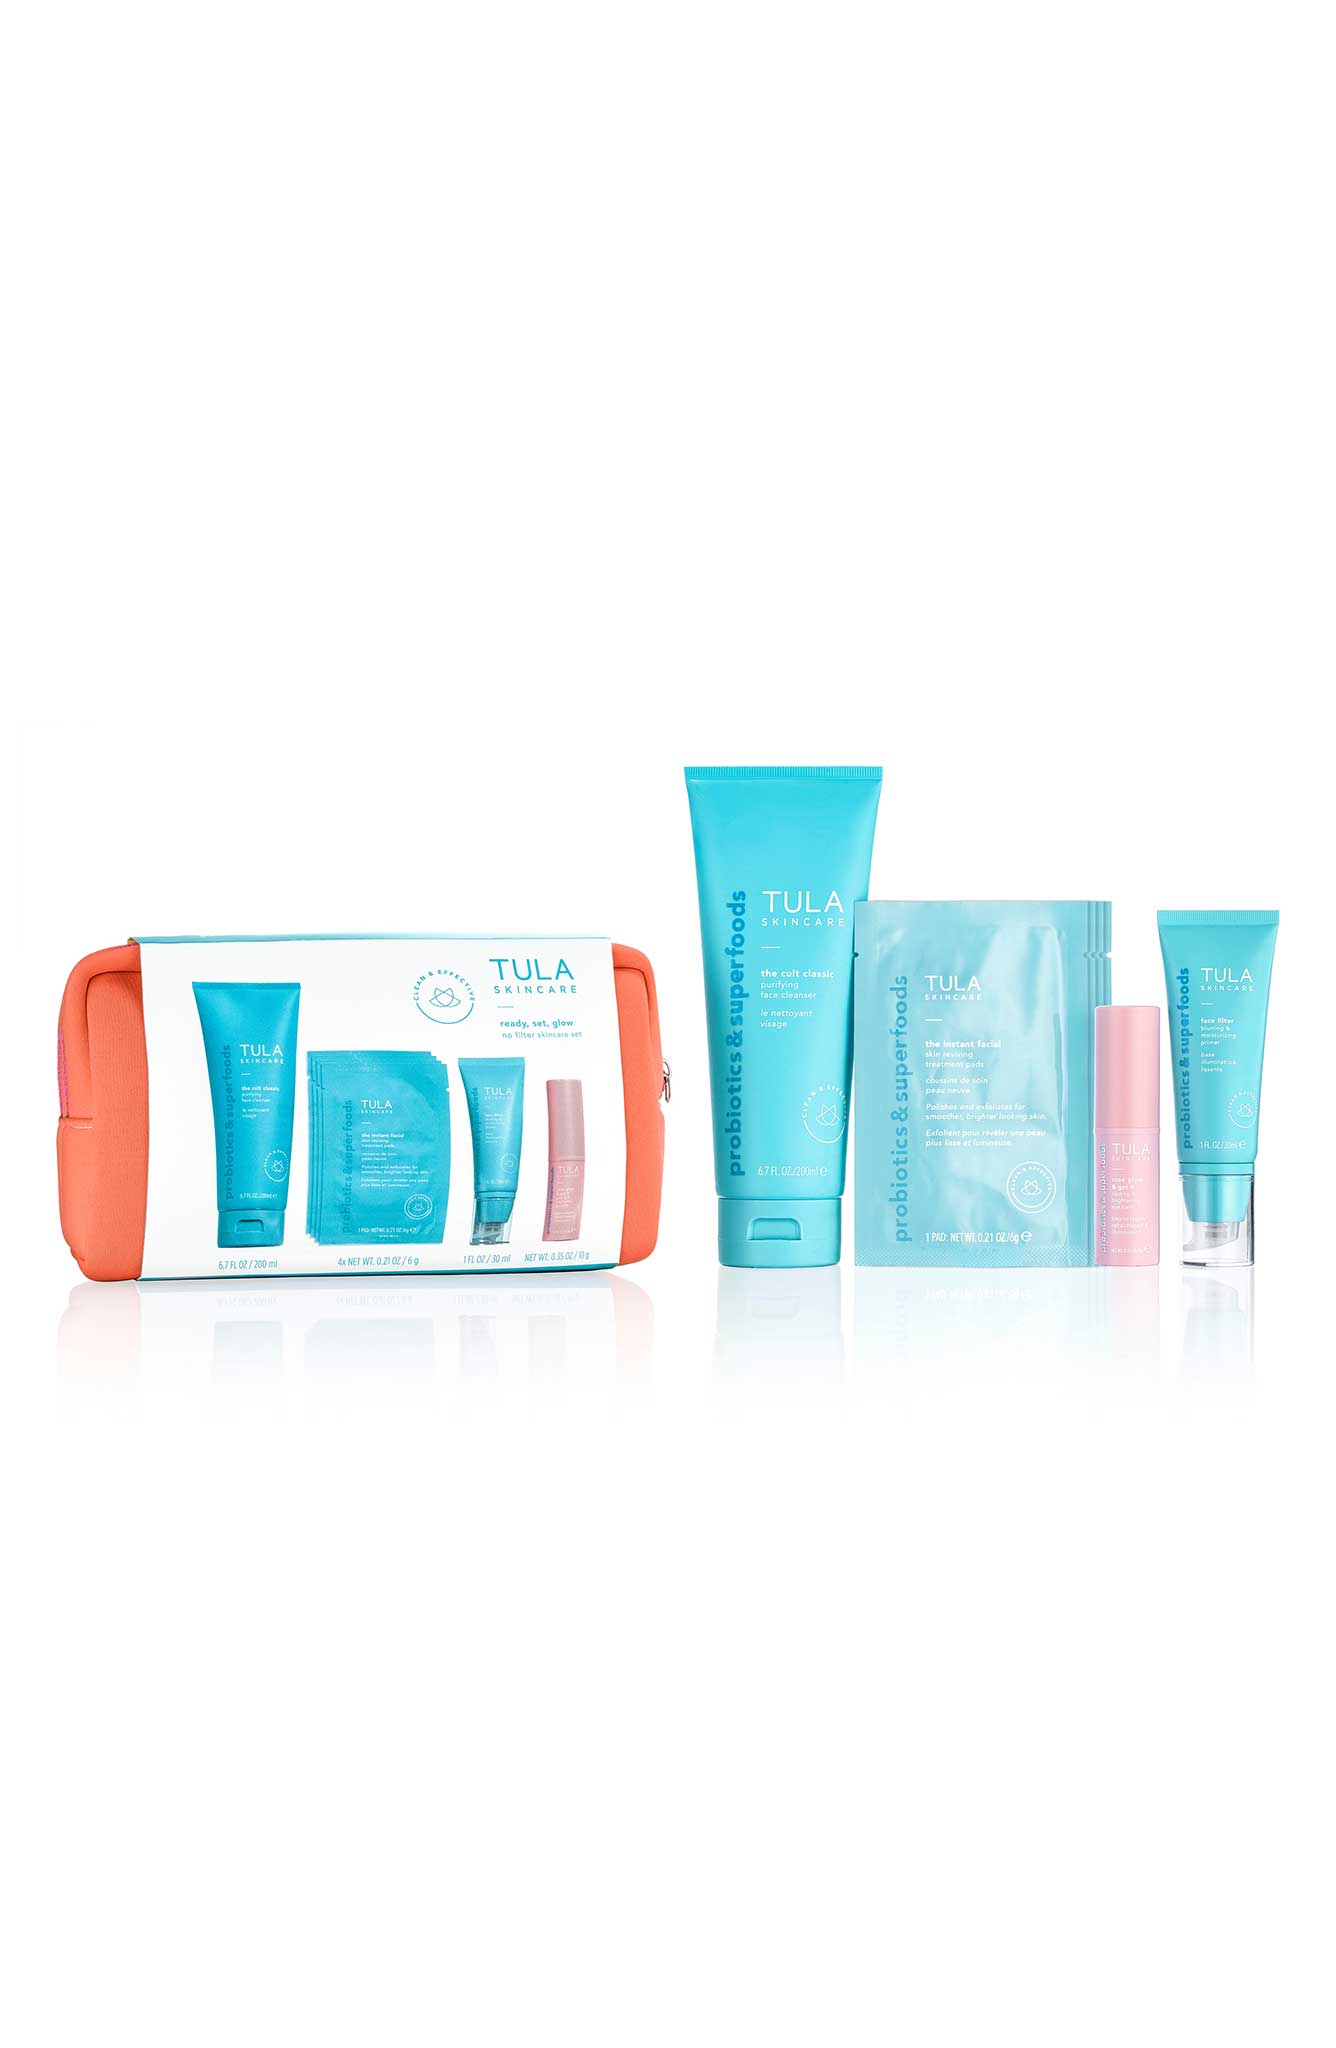 Tula Self Care Sunday Kit: This kit is packed with probiotics and caffeine – an instant solution for puffiness and dark circles. This set is new to the Anniversary Sale and it comes with the hero eye balm that EVERYONE is talking about.